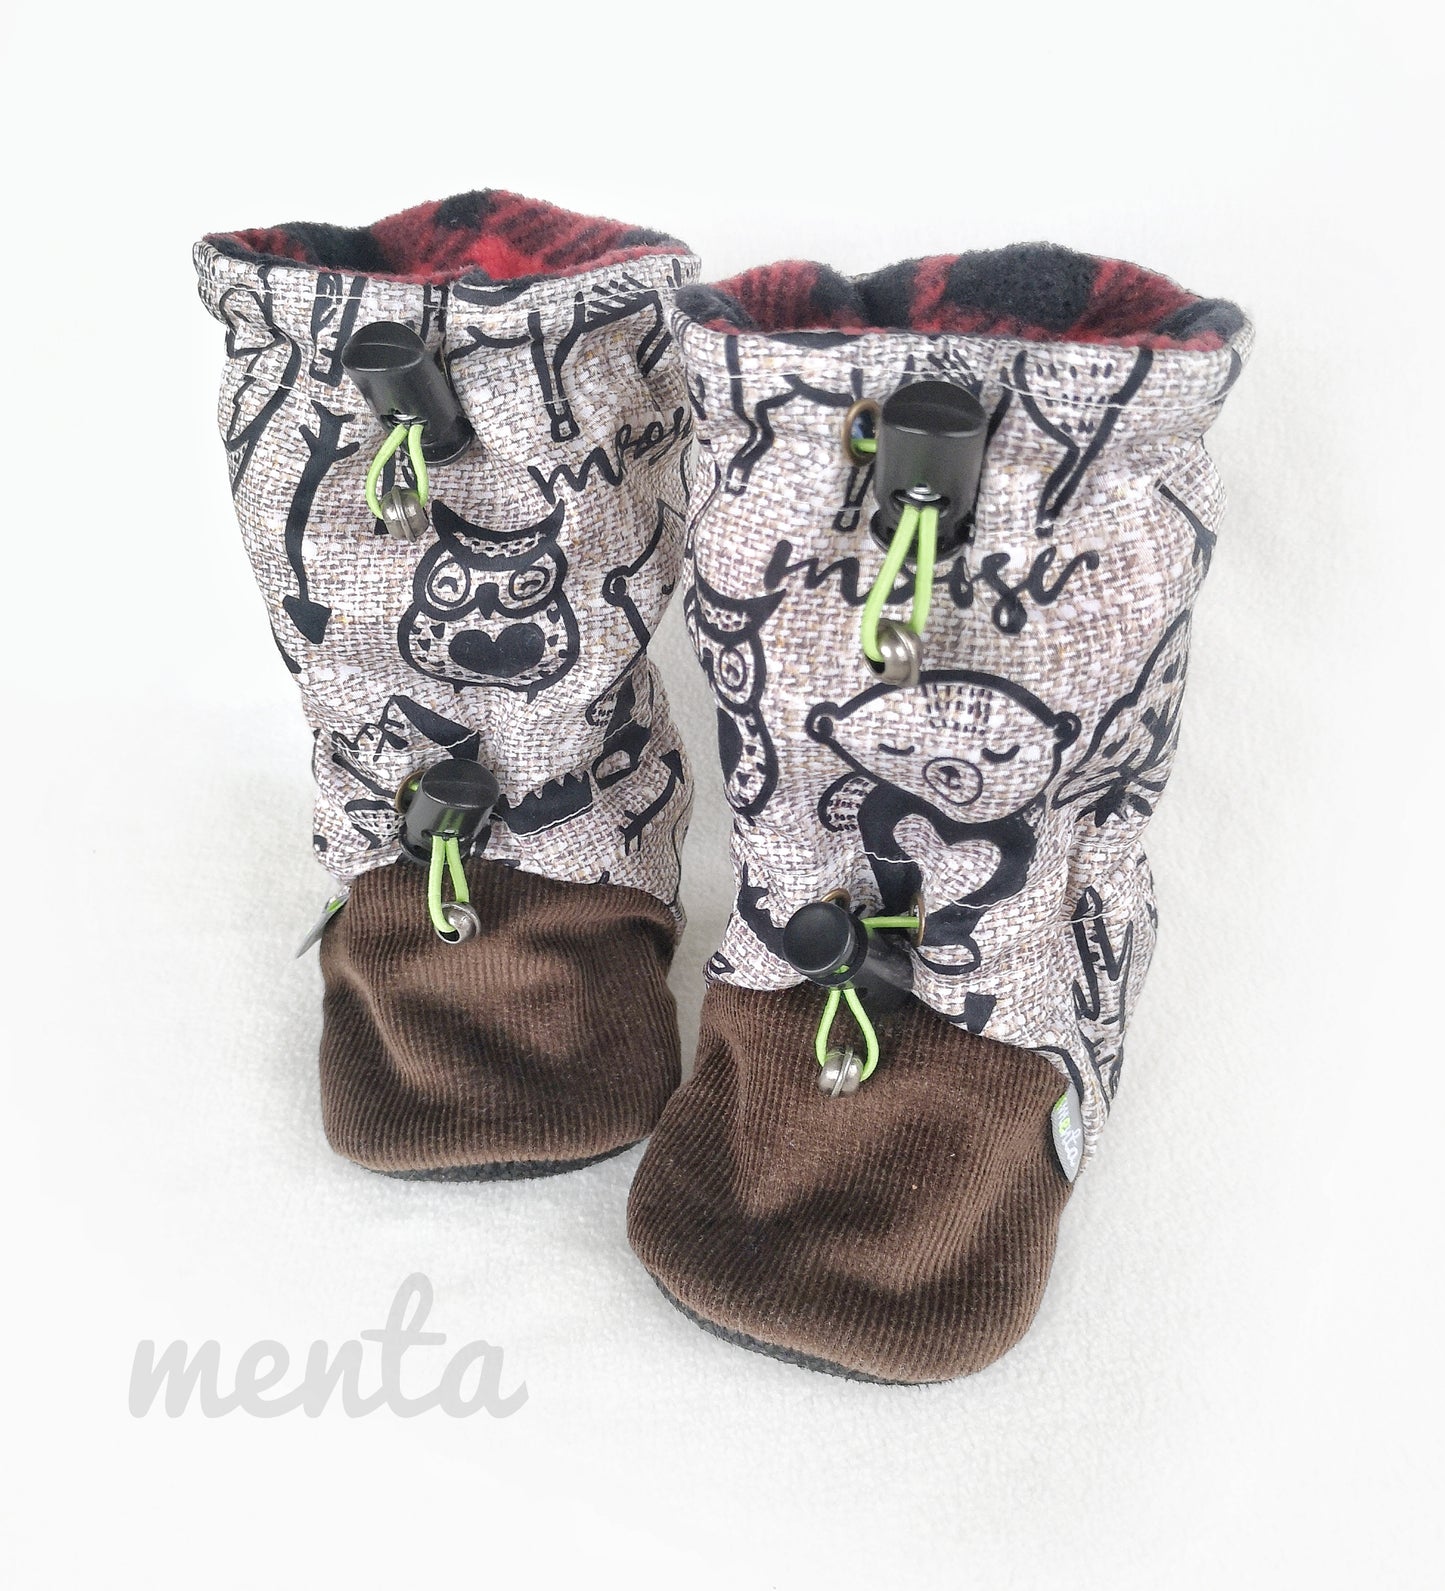 Overall Menta Booties 4" to 6.5"